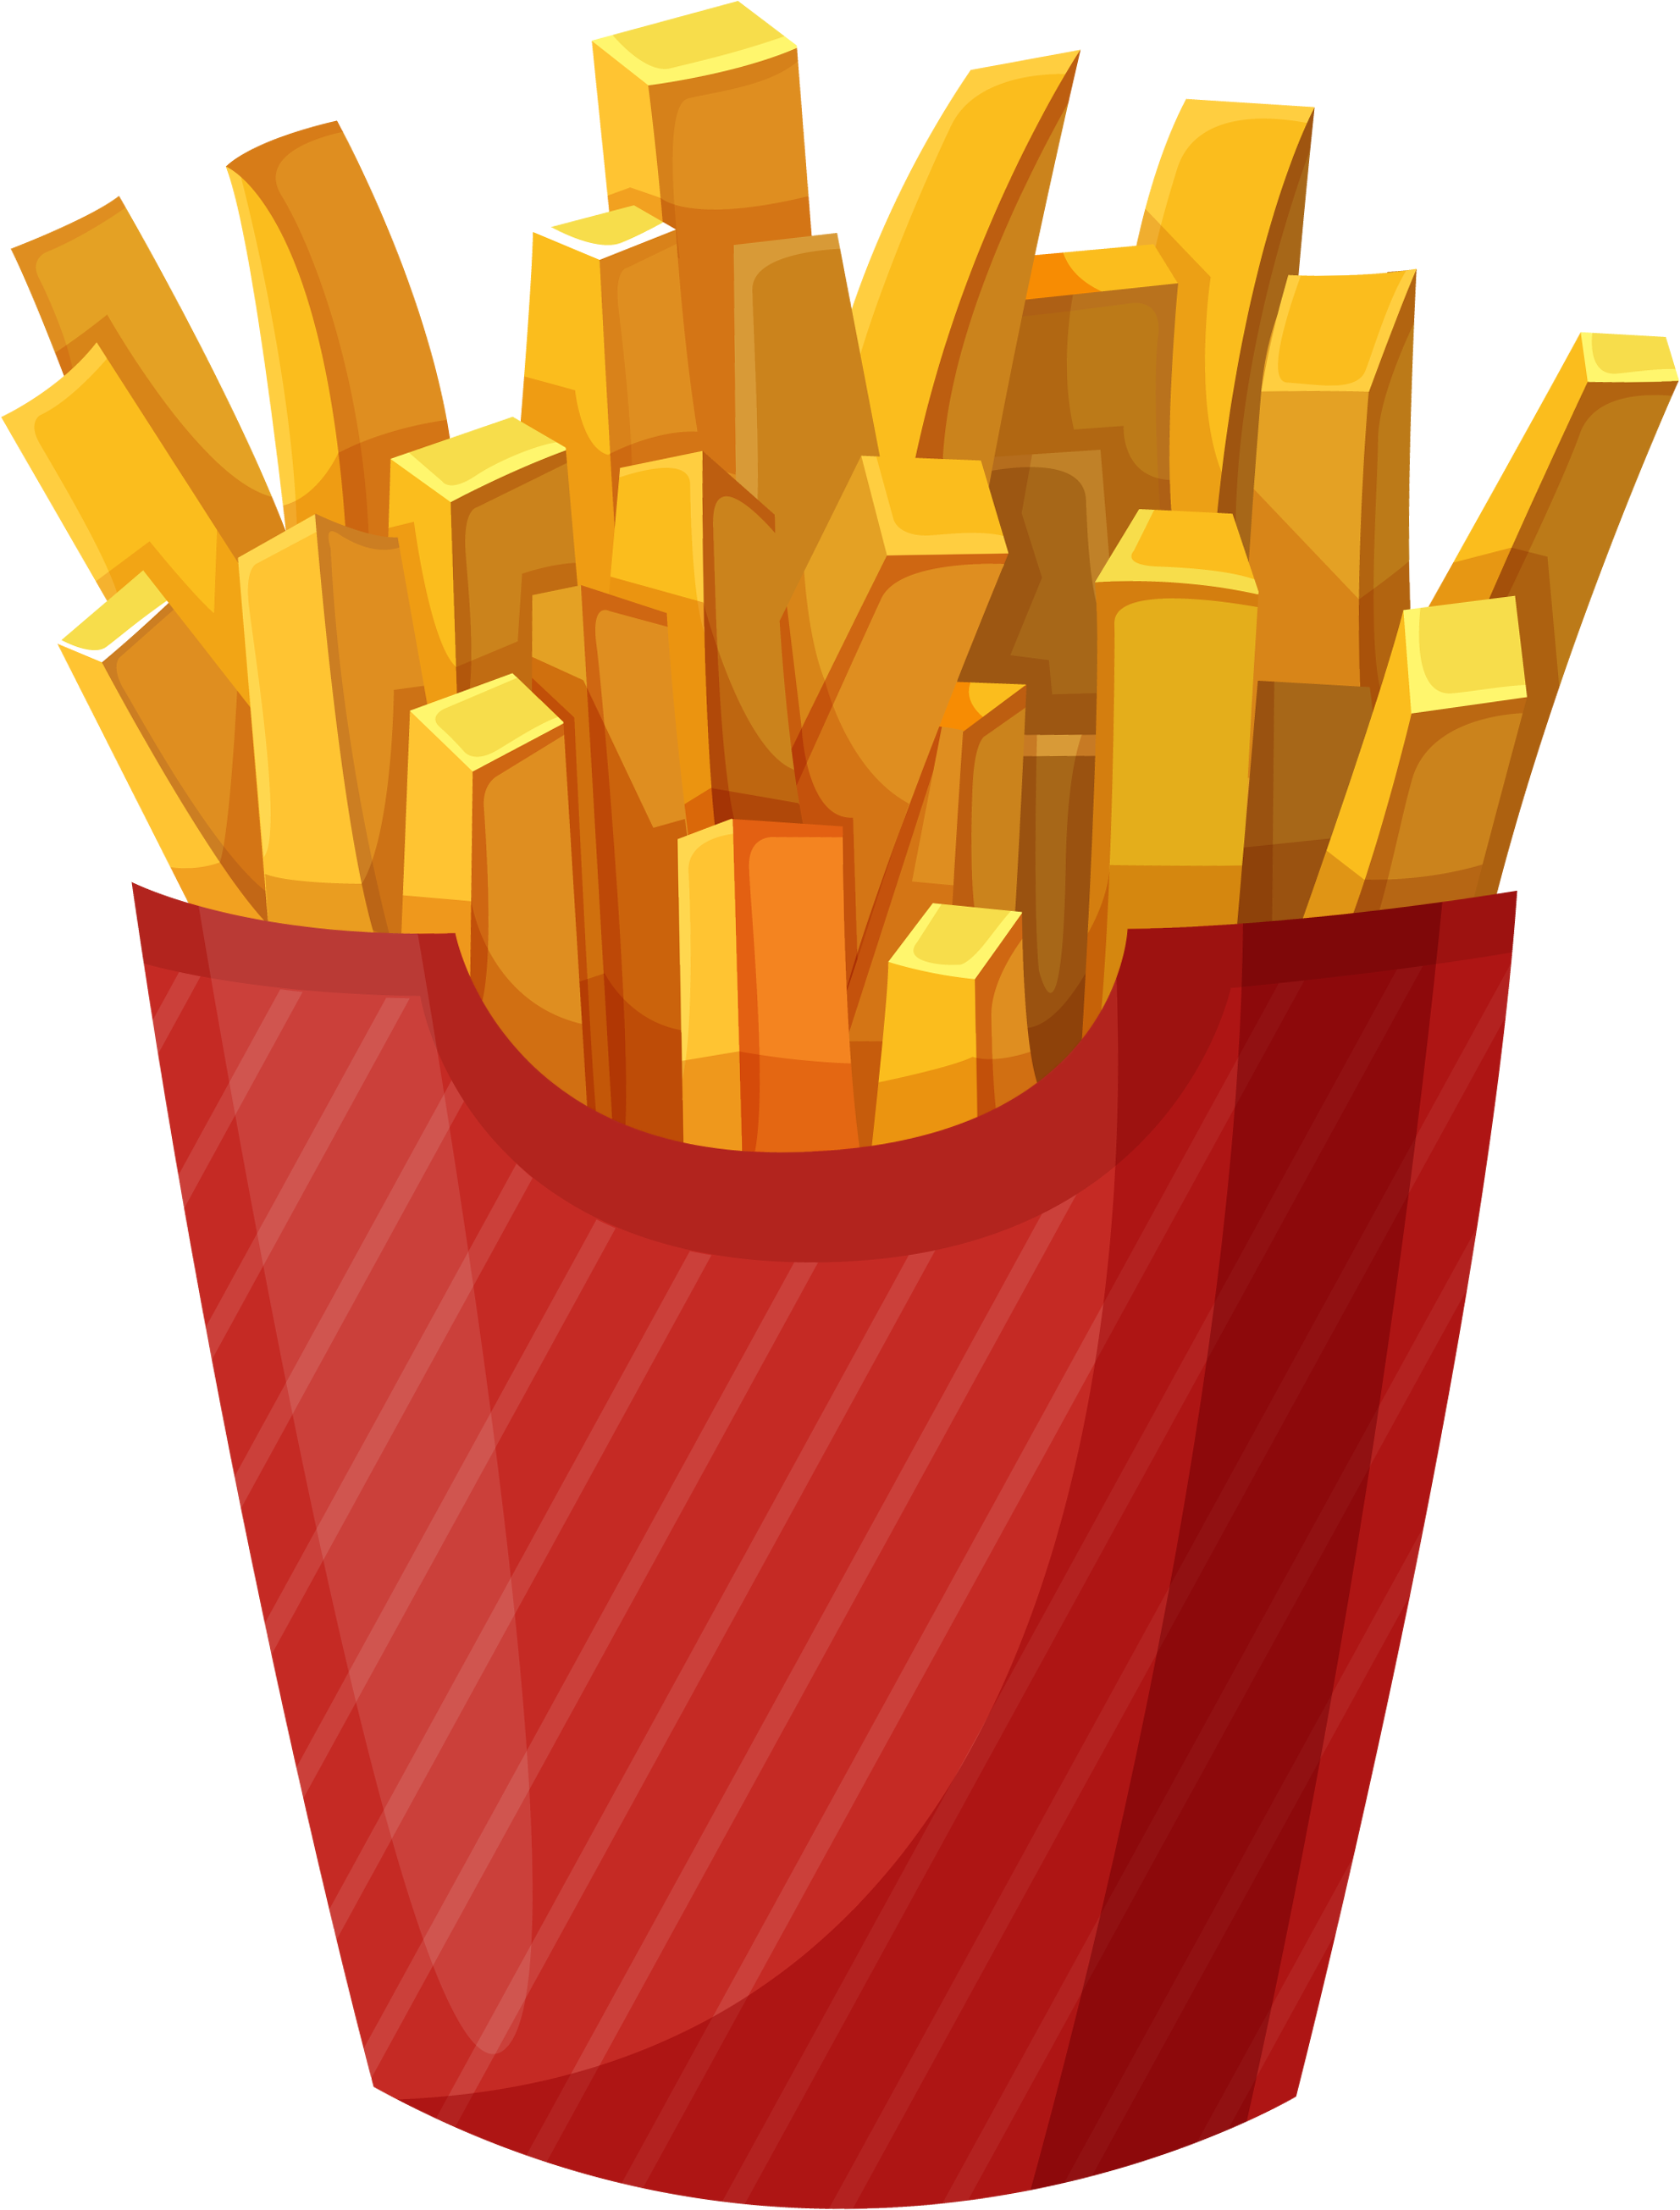 A French Fries In A Red Package